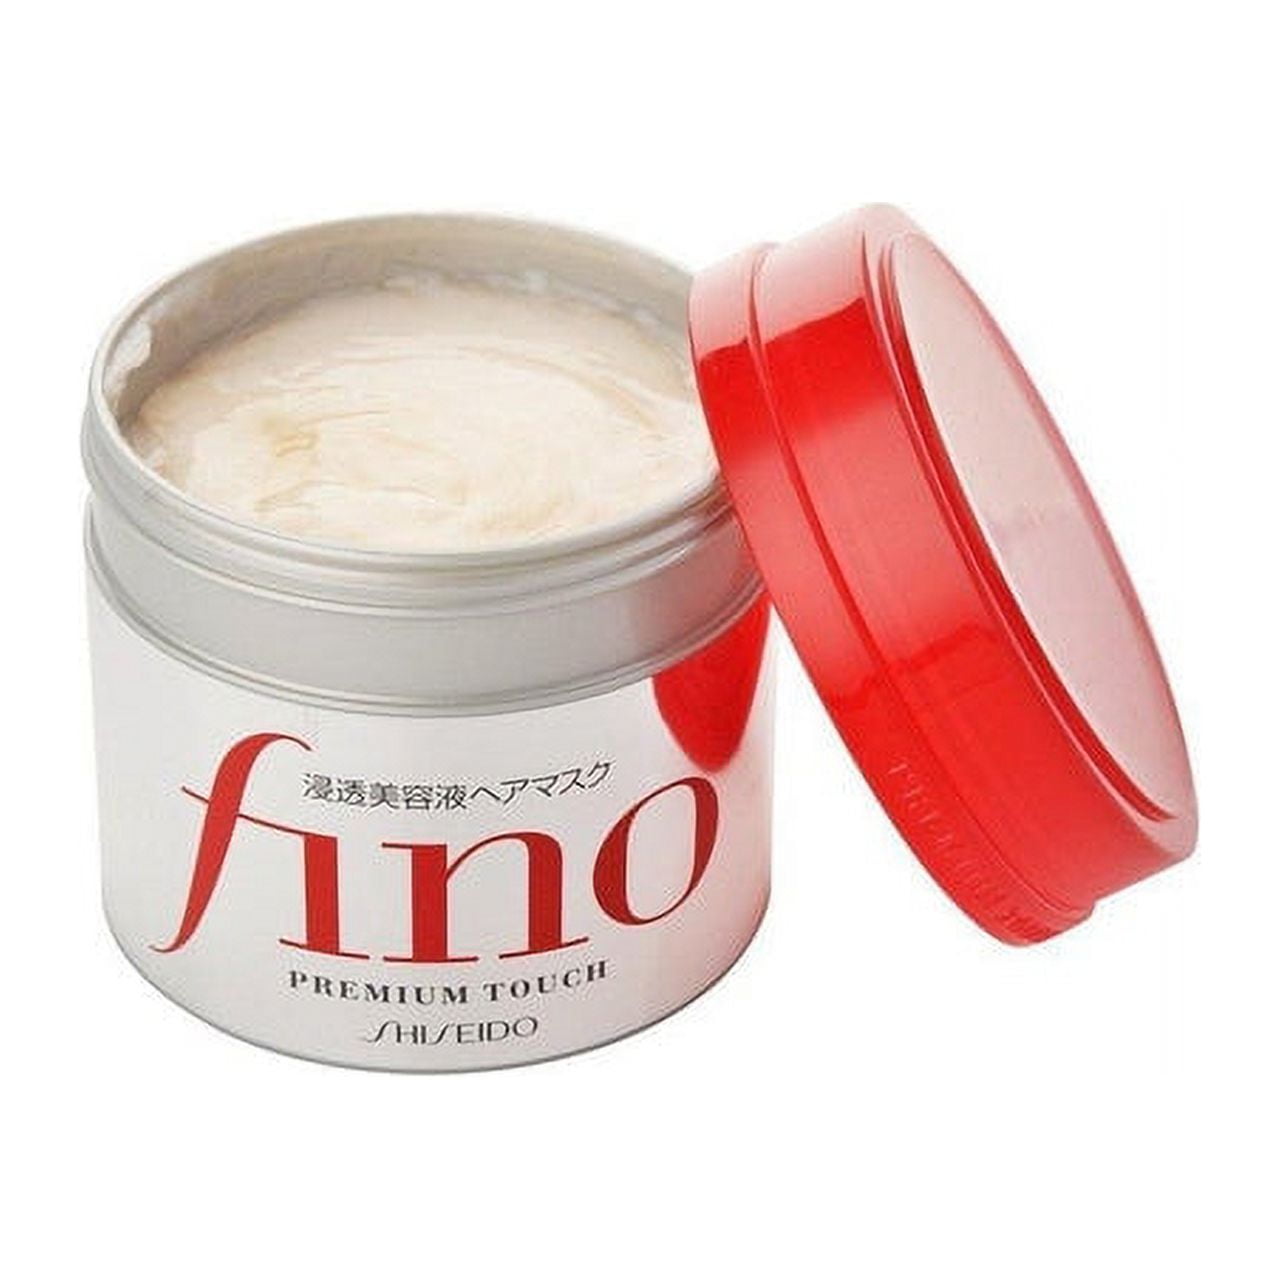 Dropship SHISEIDO - Fino Premium Touch Hair Mask 837144 230g to Sell Online  at a Lower Price